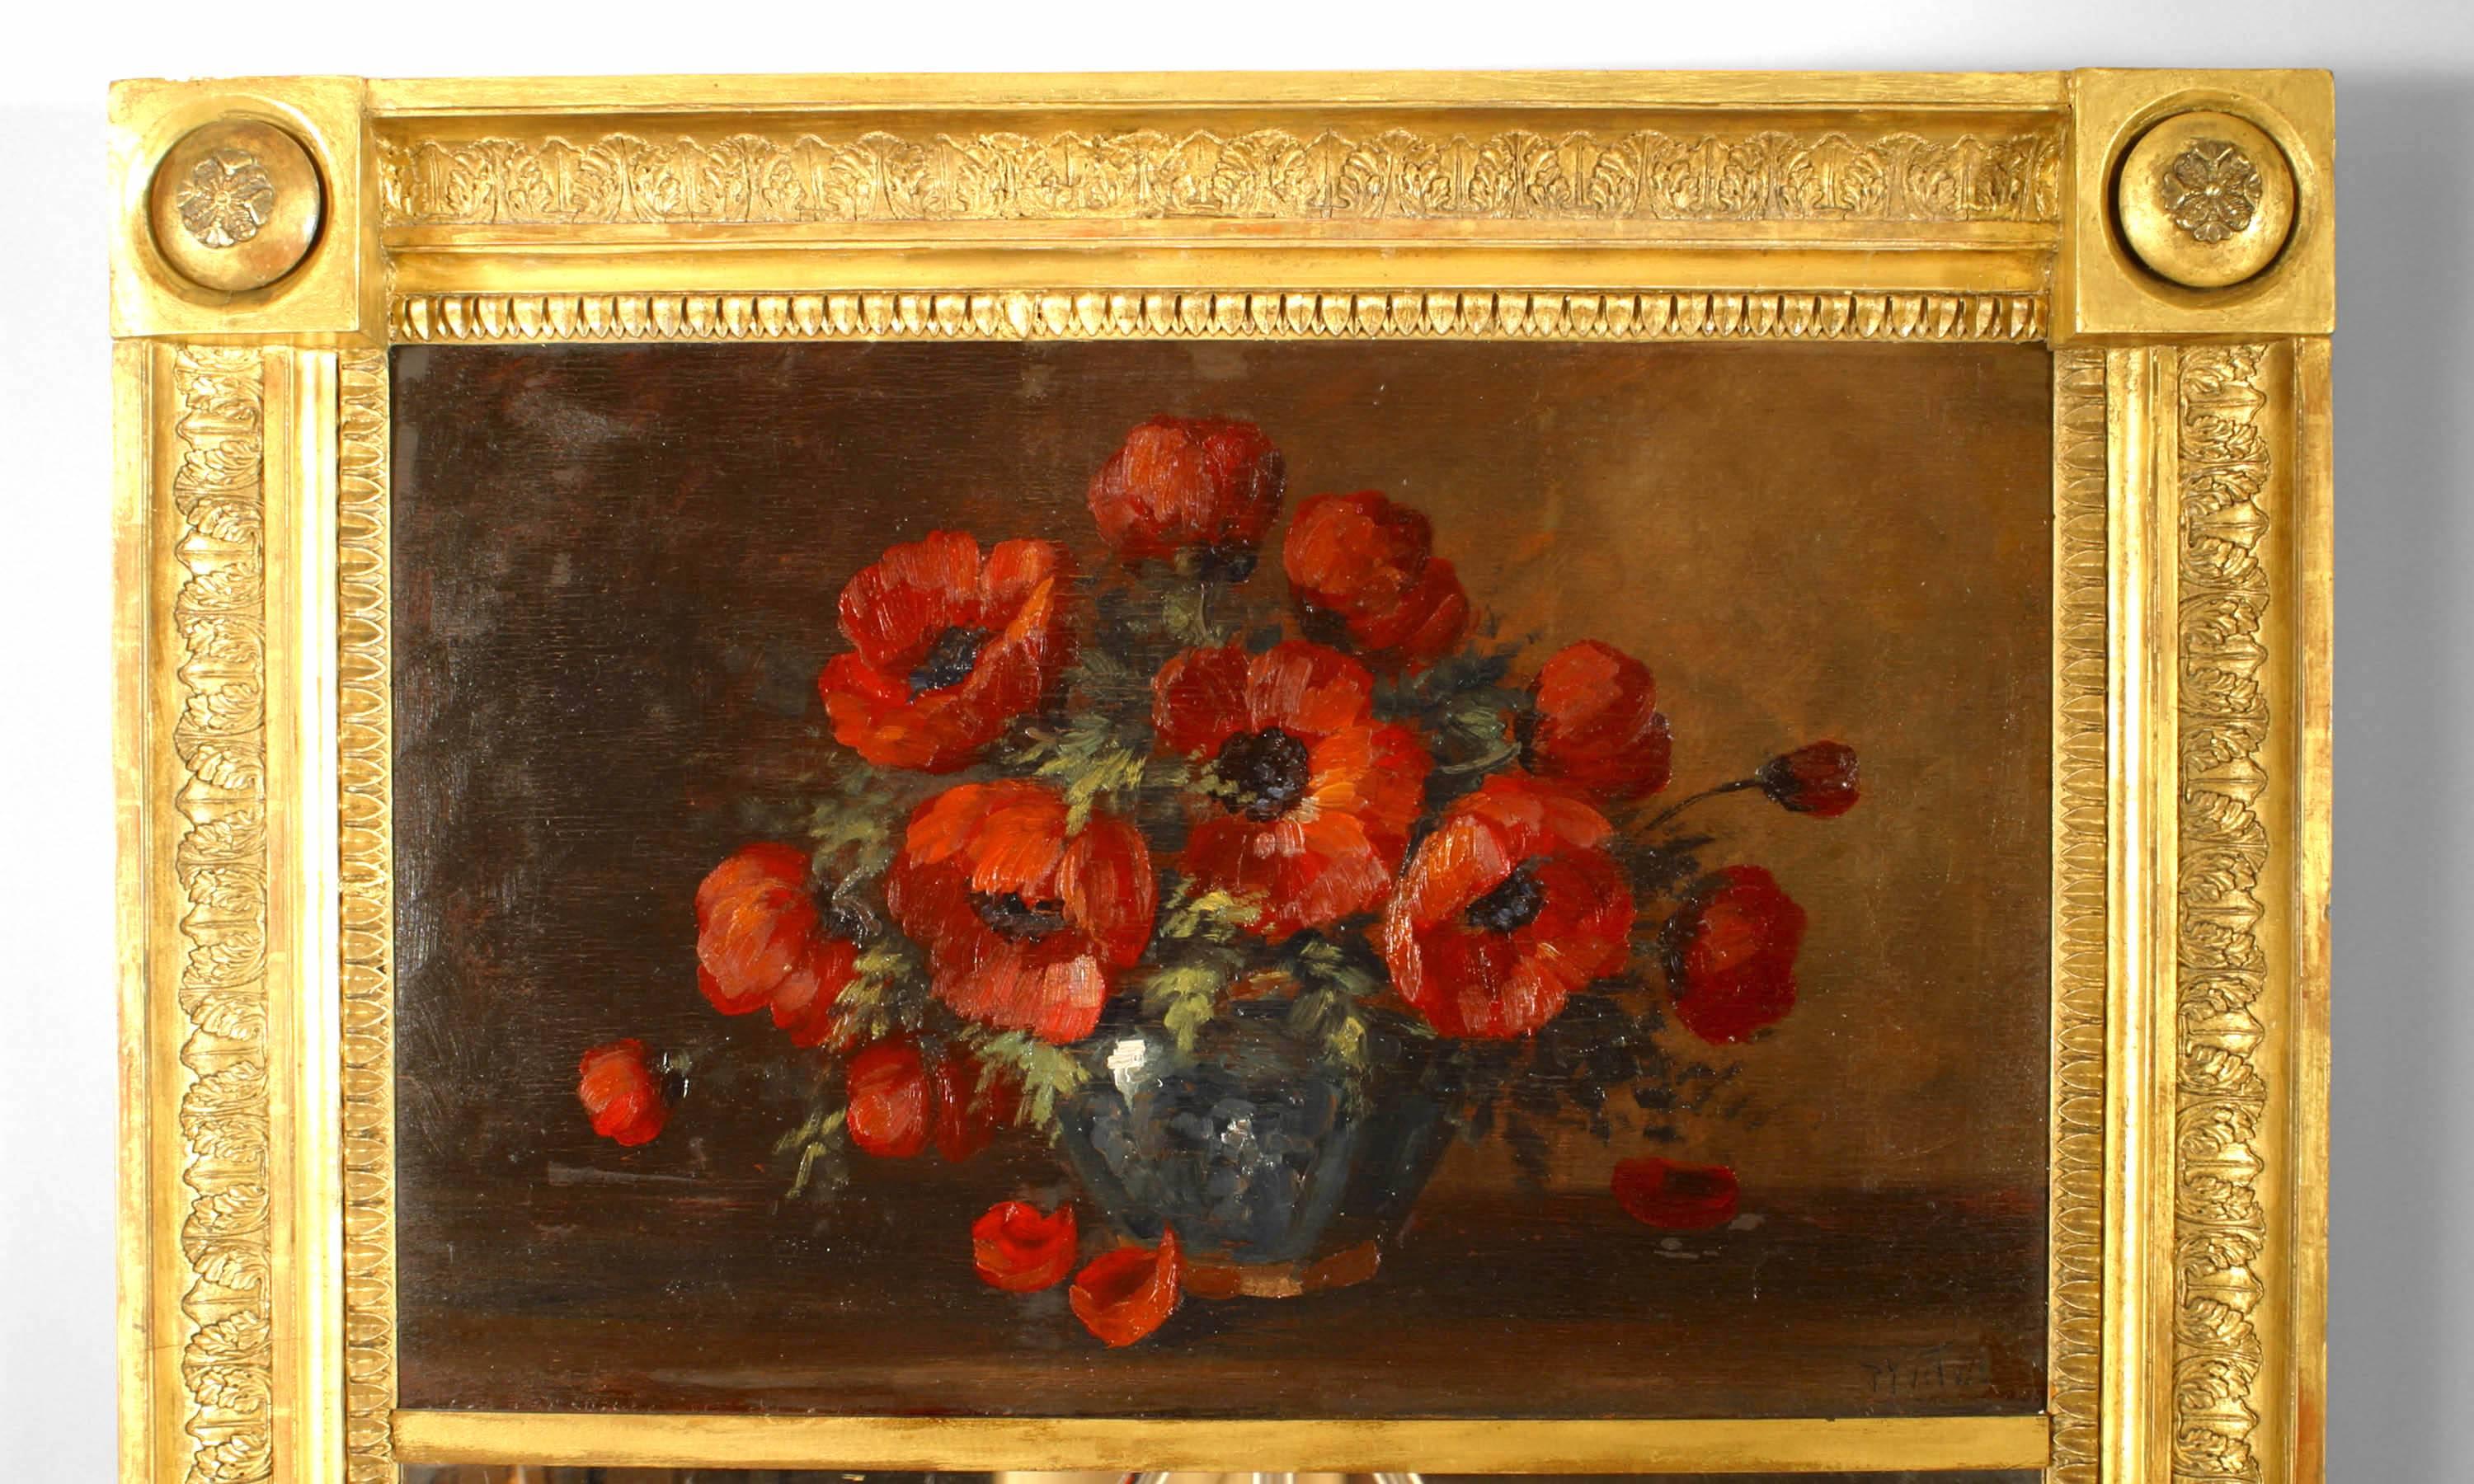 French Empire-style (19th Century) carved giltwood trumeau / wall mirror with painted upper panel of red poppies and flowers (signed).
